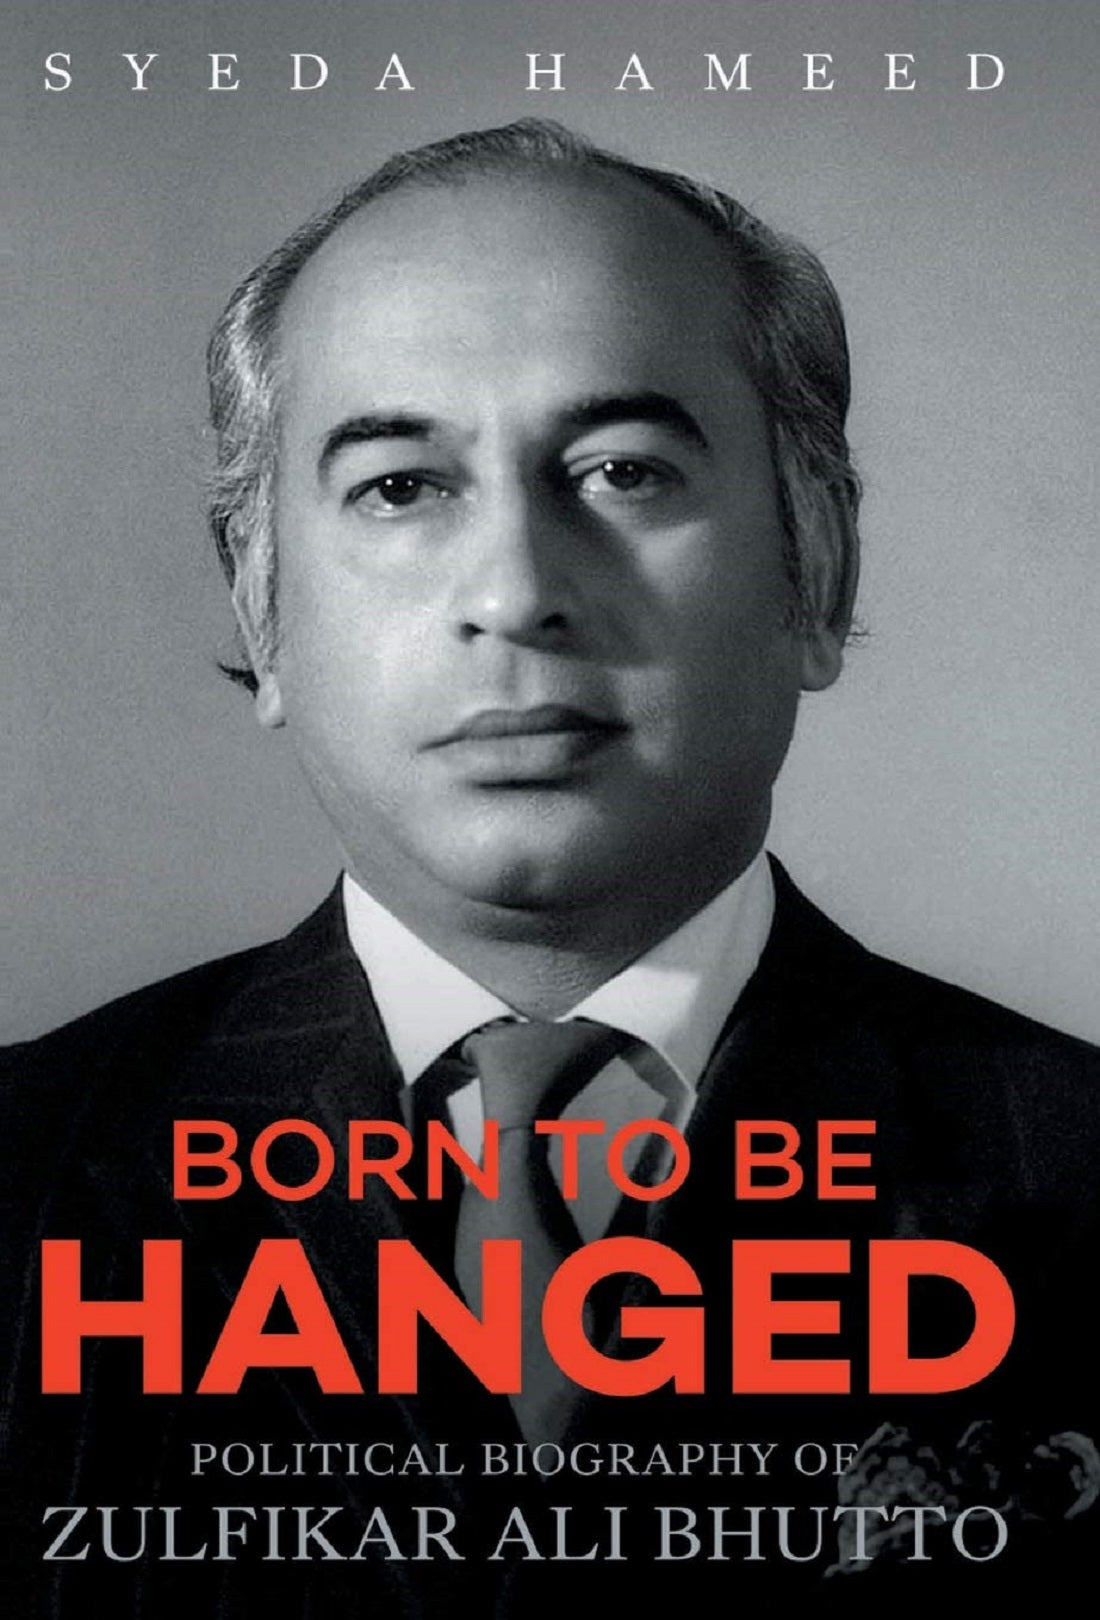 BORN TO BE HANGED